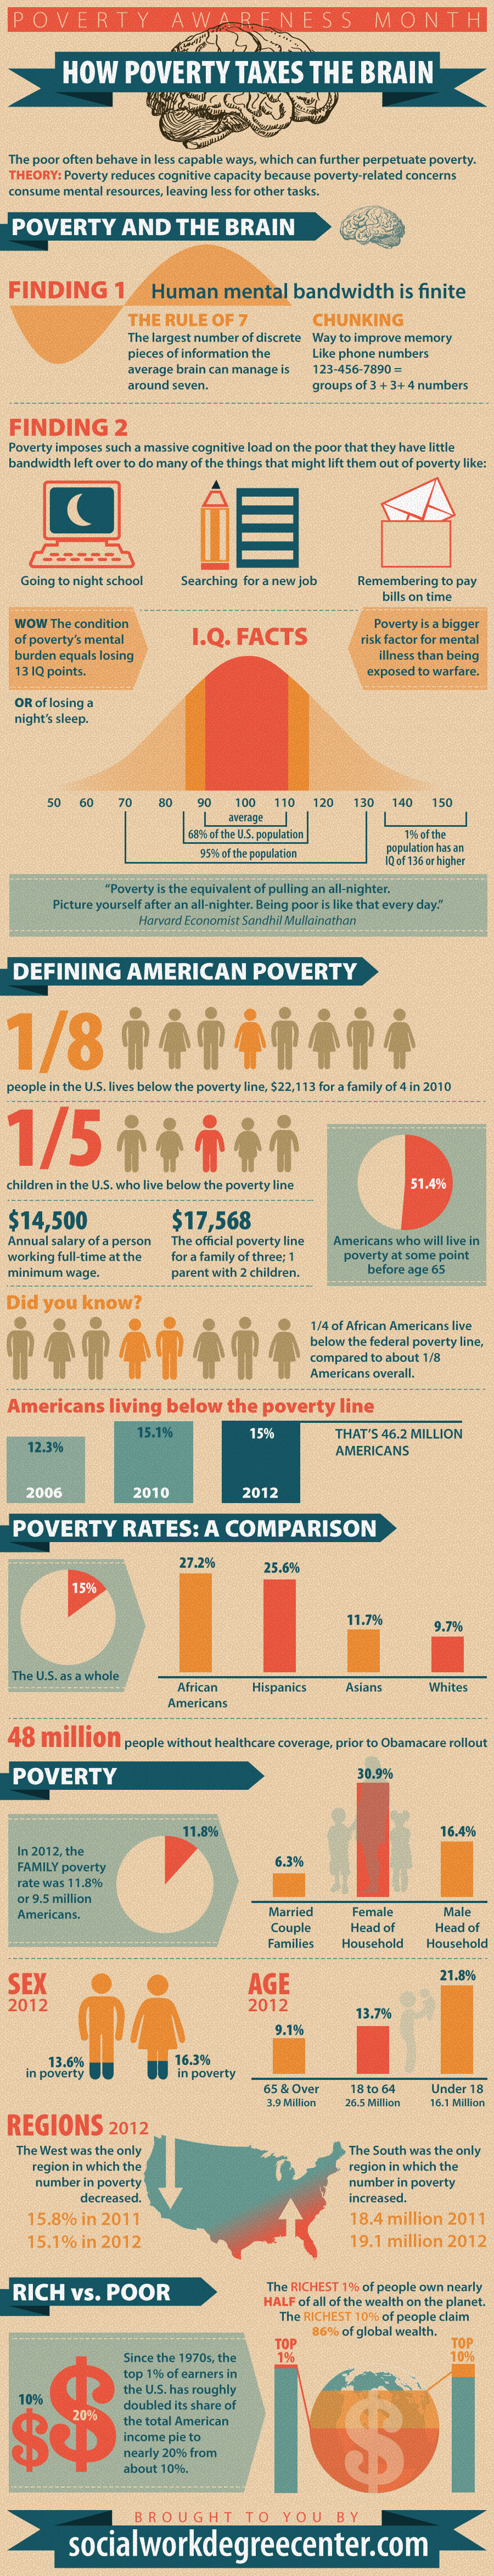 "Poverty and the Brain" width="500"  border="0" /></a><br />Source: <a href="http://www.socialworkdegreecenter.com/">SocialWorkDegreeCenter.comt</a>